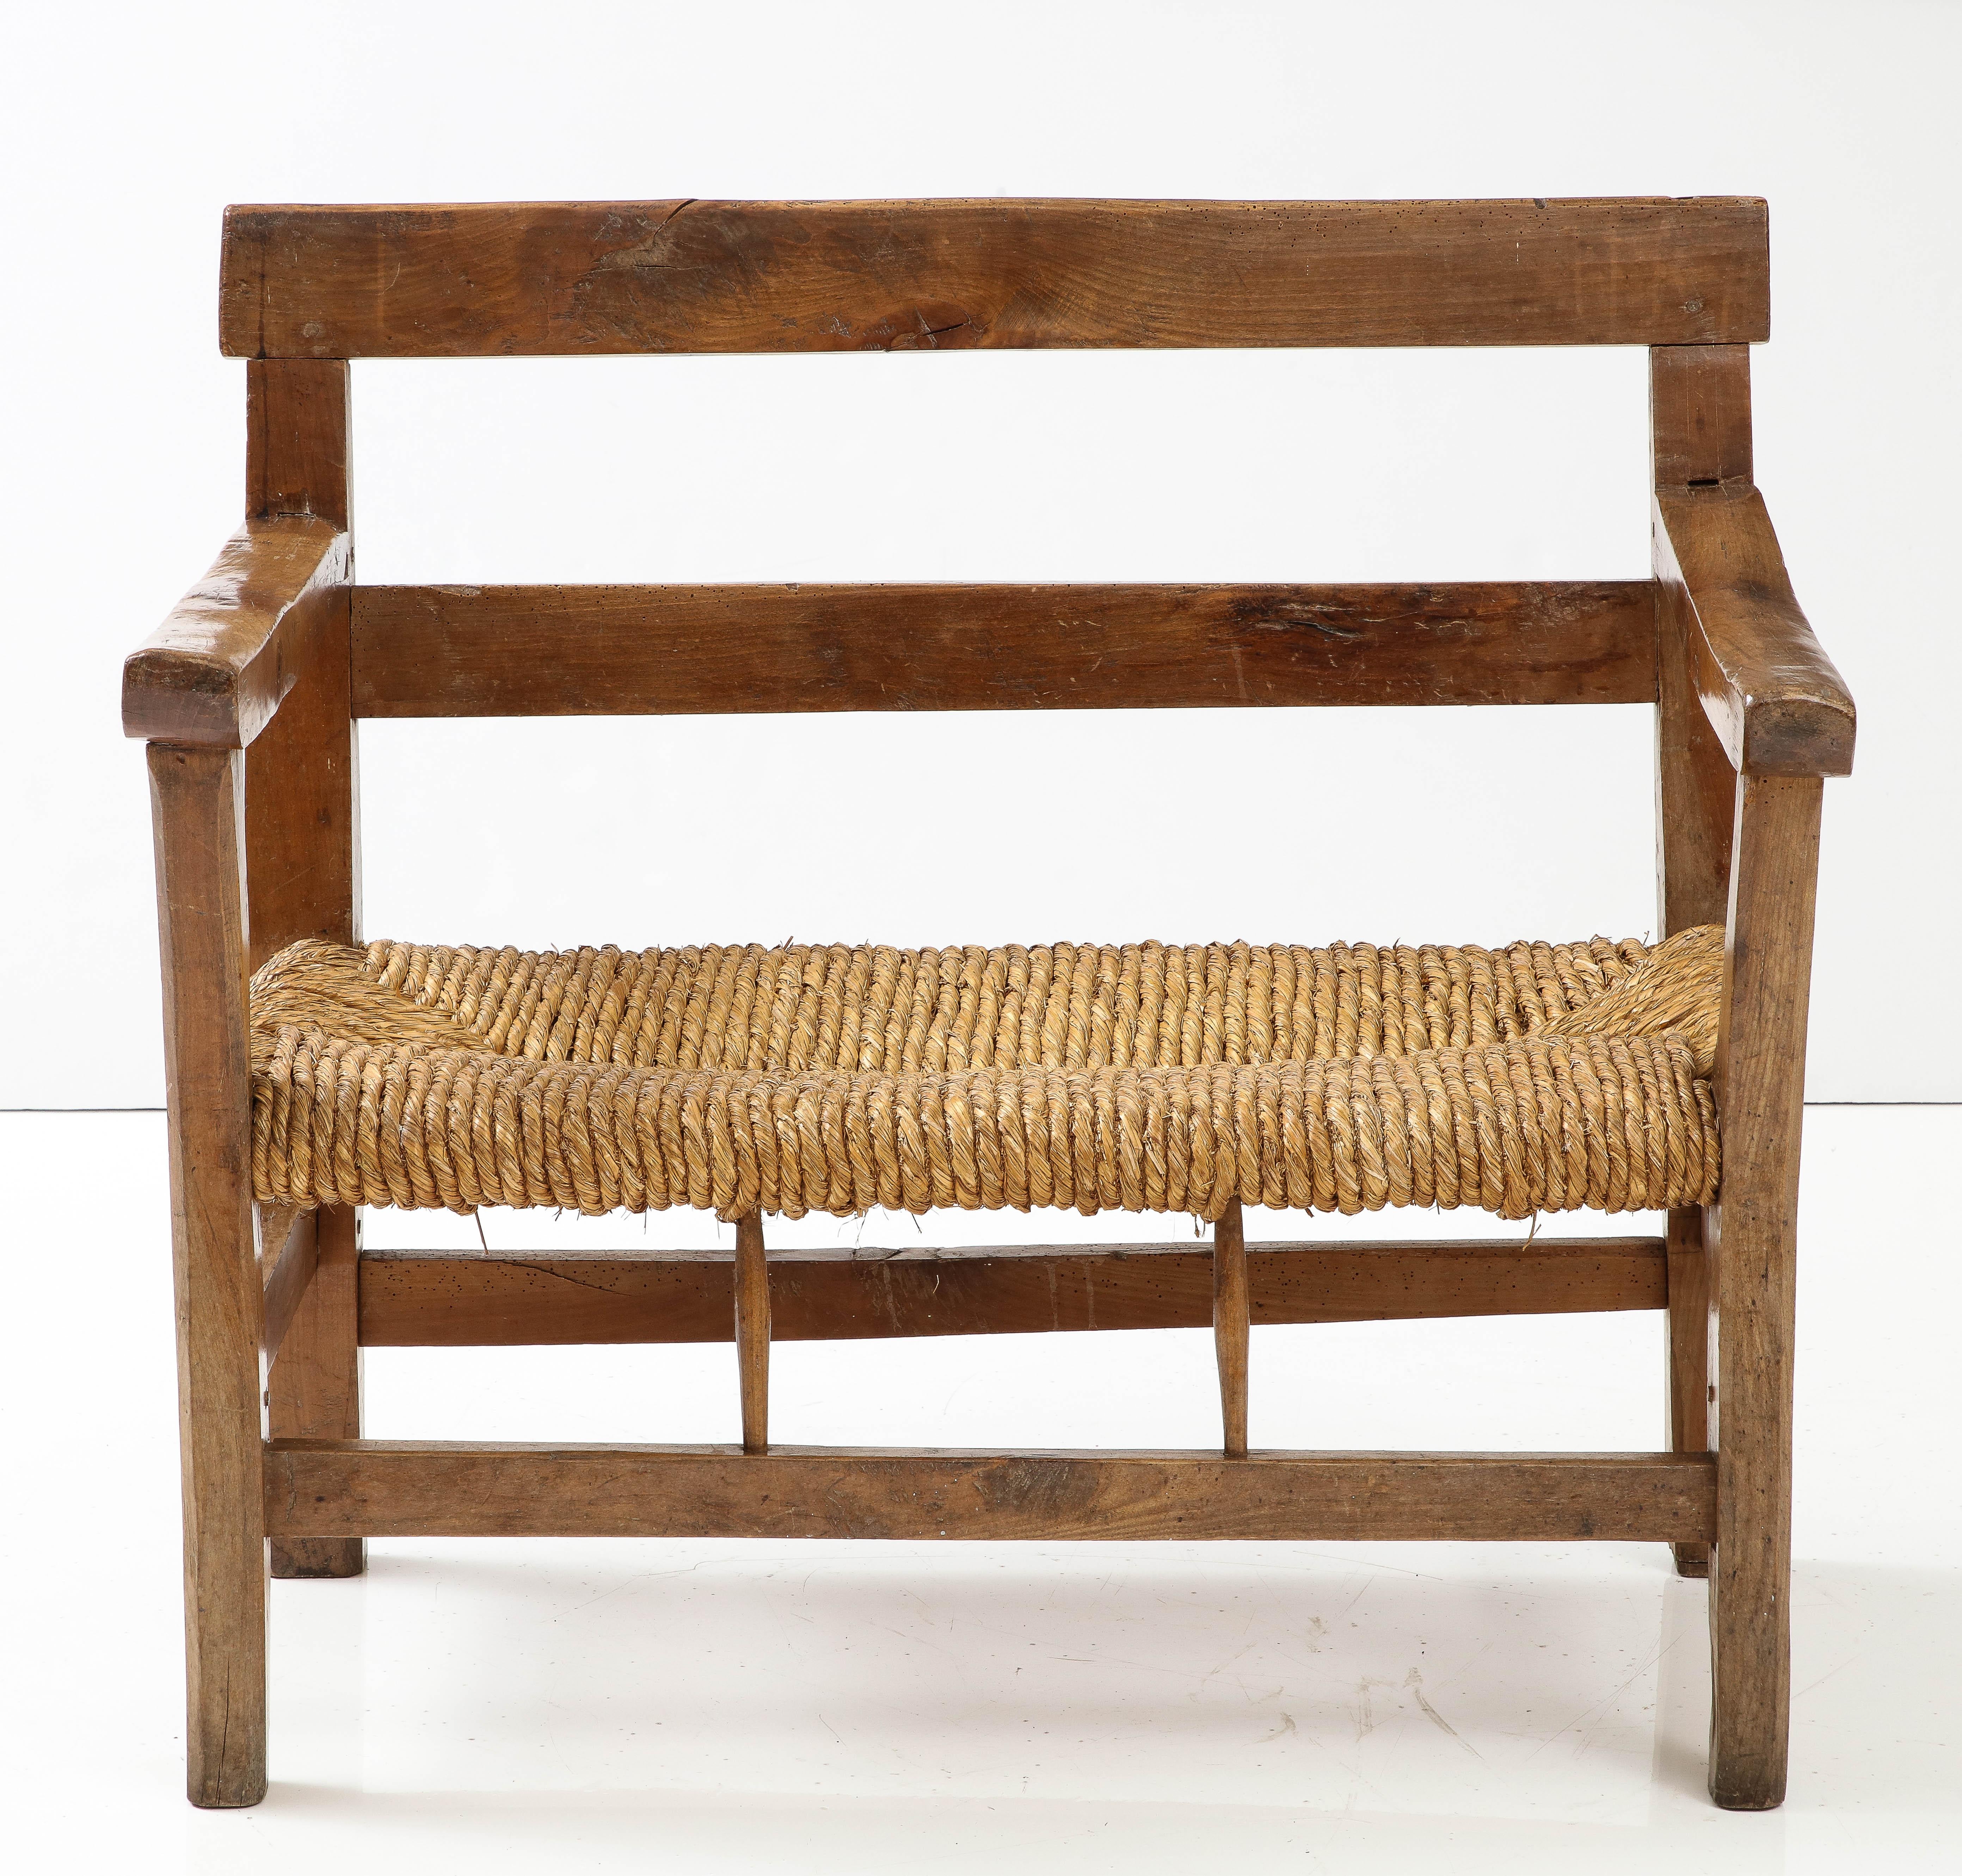 19th C./ early 20th C. French Solid wood bench with thatched seat (original!), Rhone Alps/Provence Region

Measures: H: 33.5 D: 22.75 W: 37.5 in.